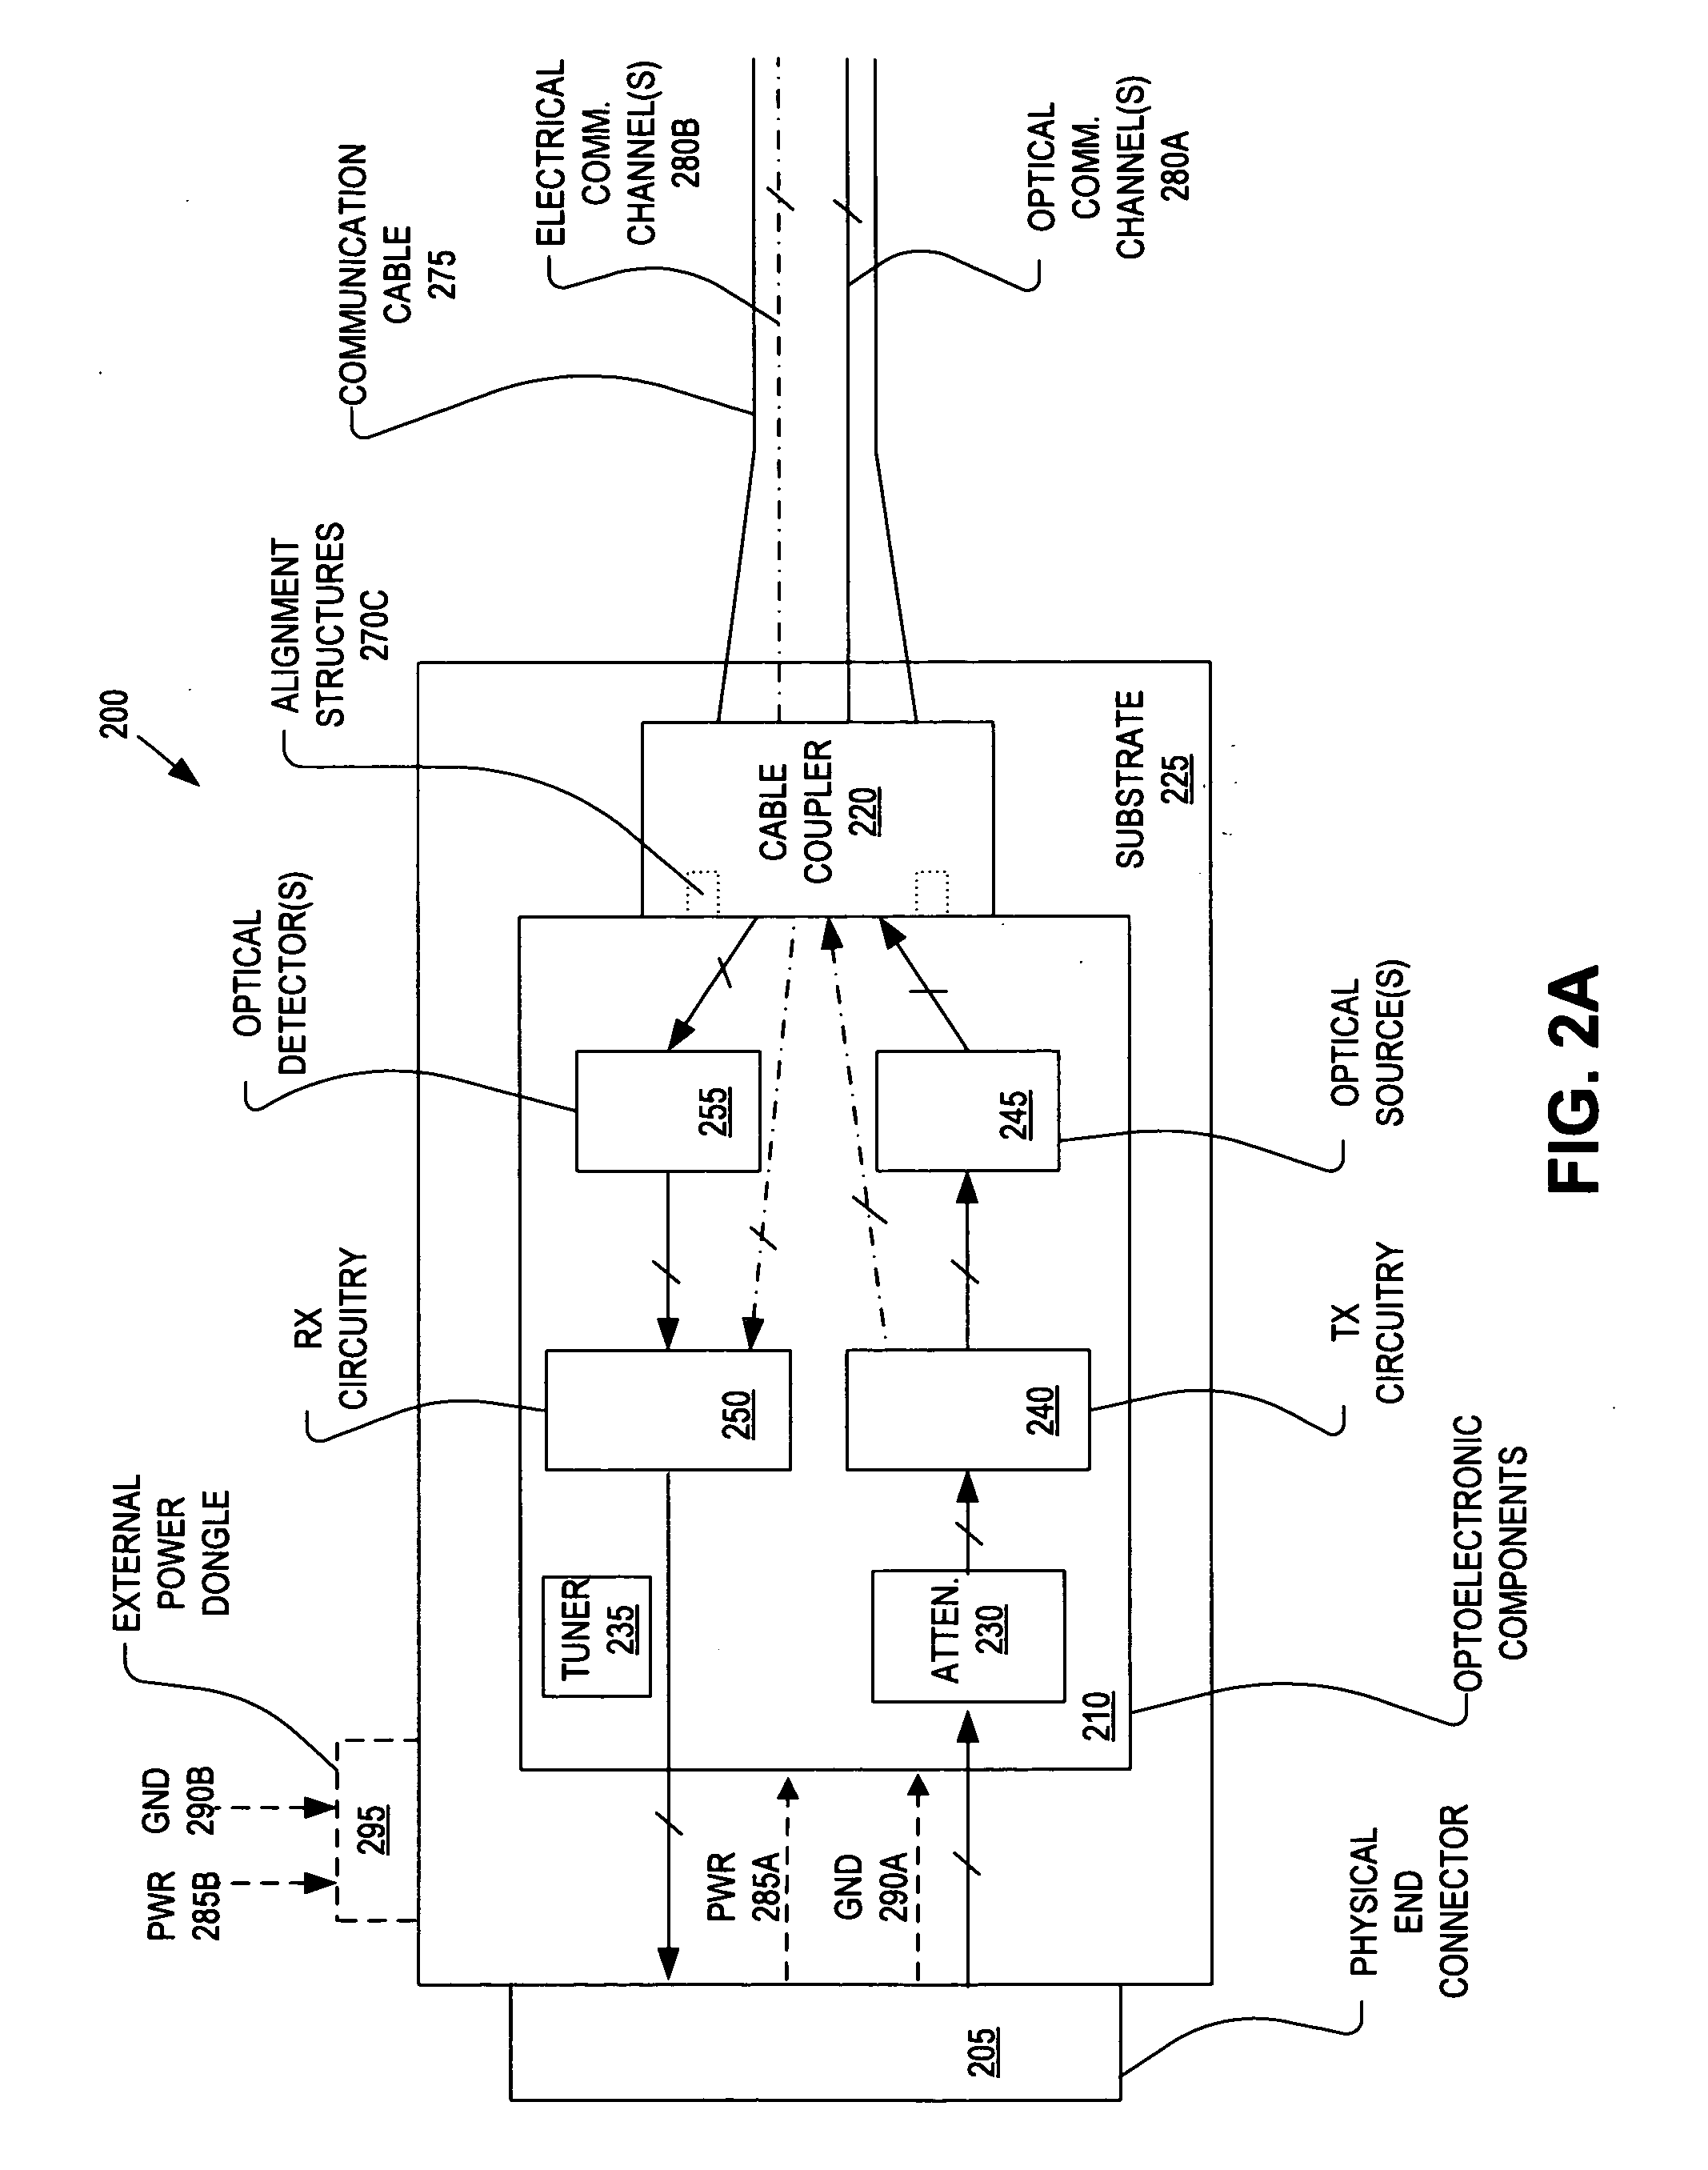 Monolithic active optical cable assembly for data device applications and various connector types